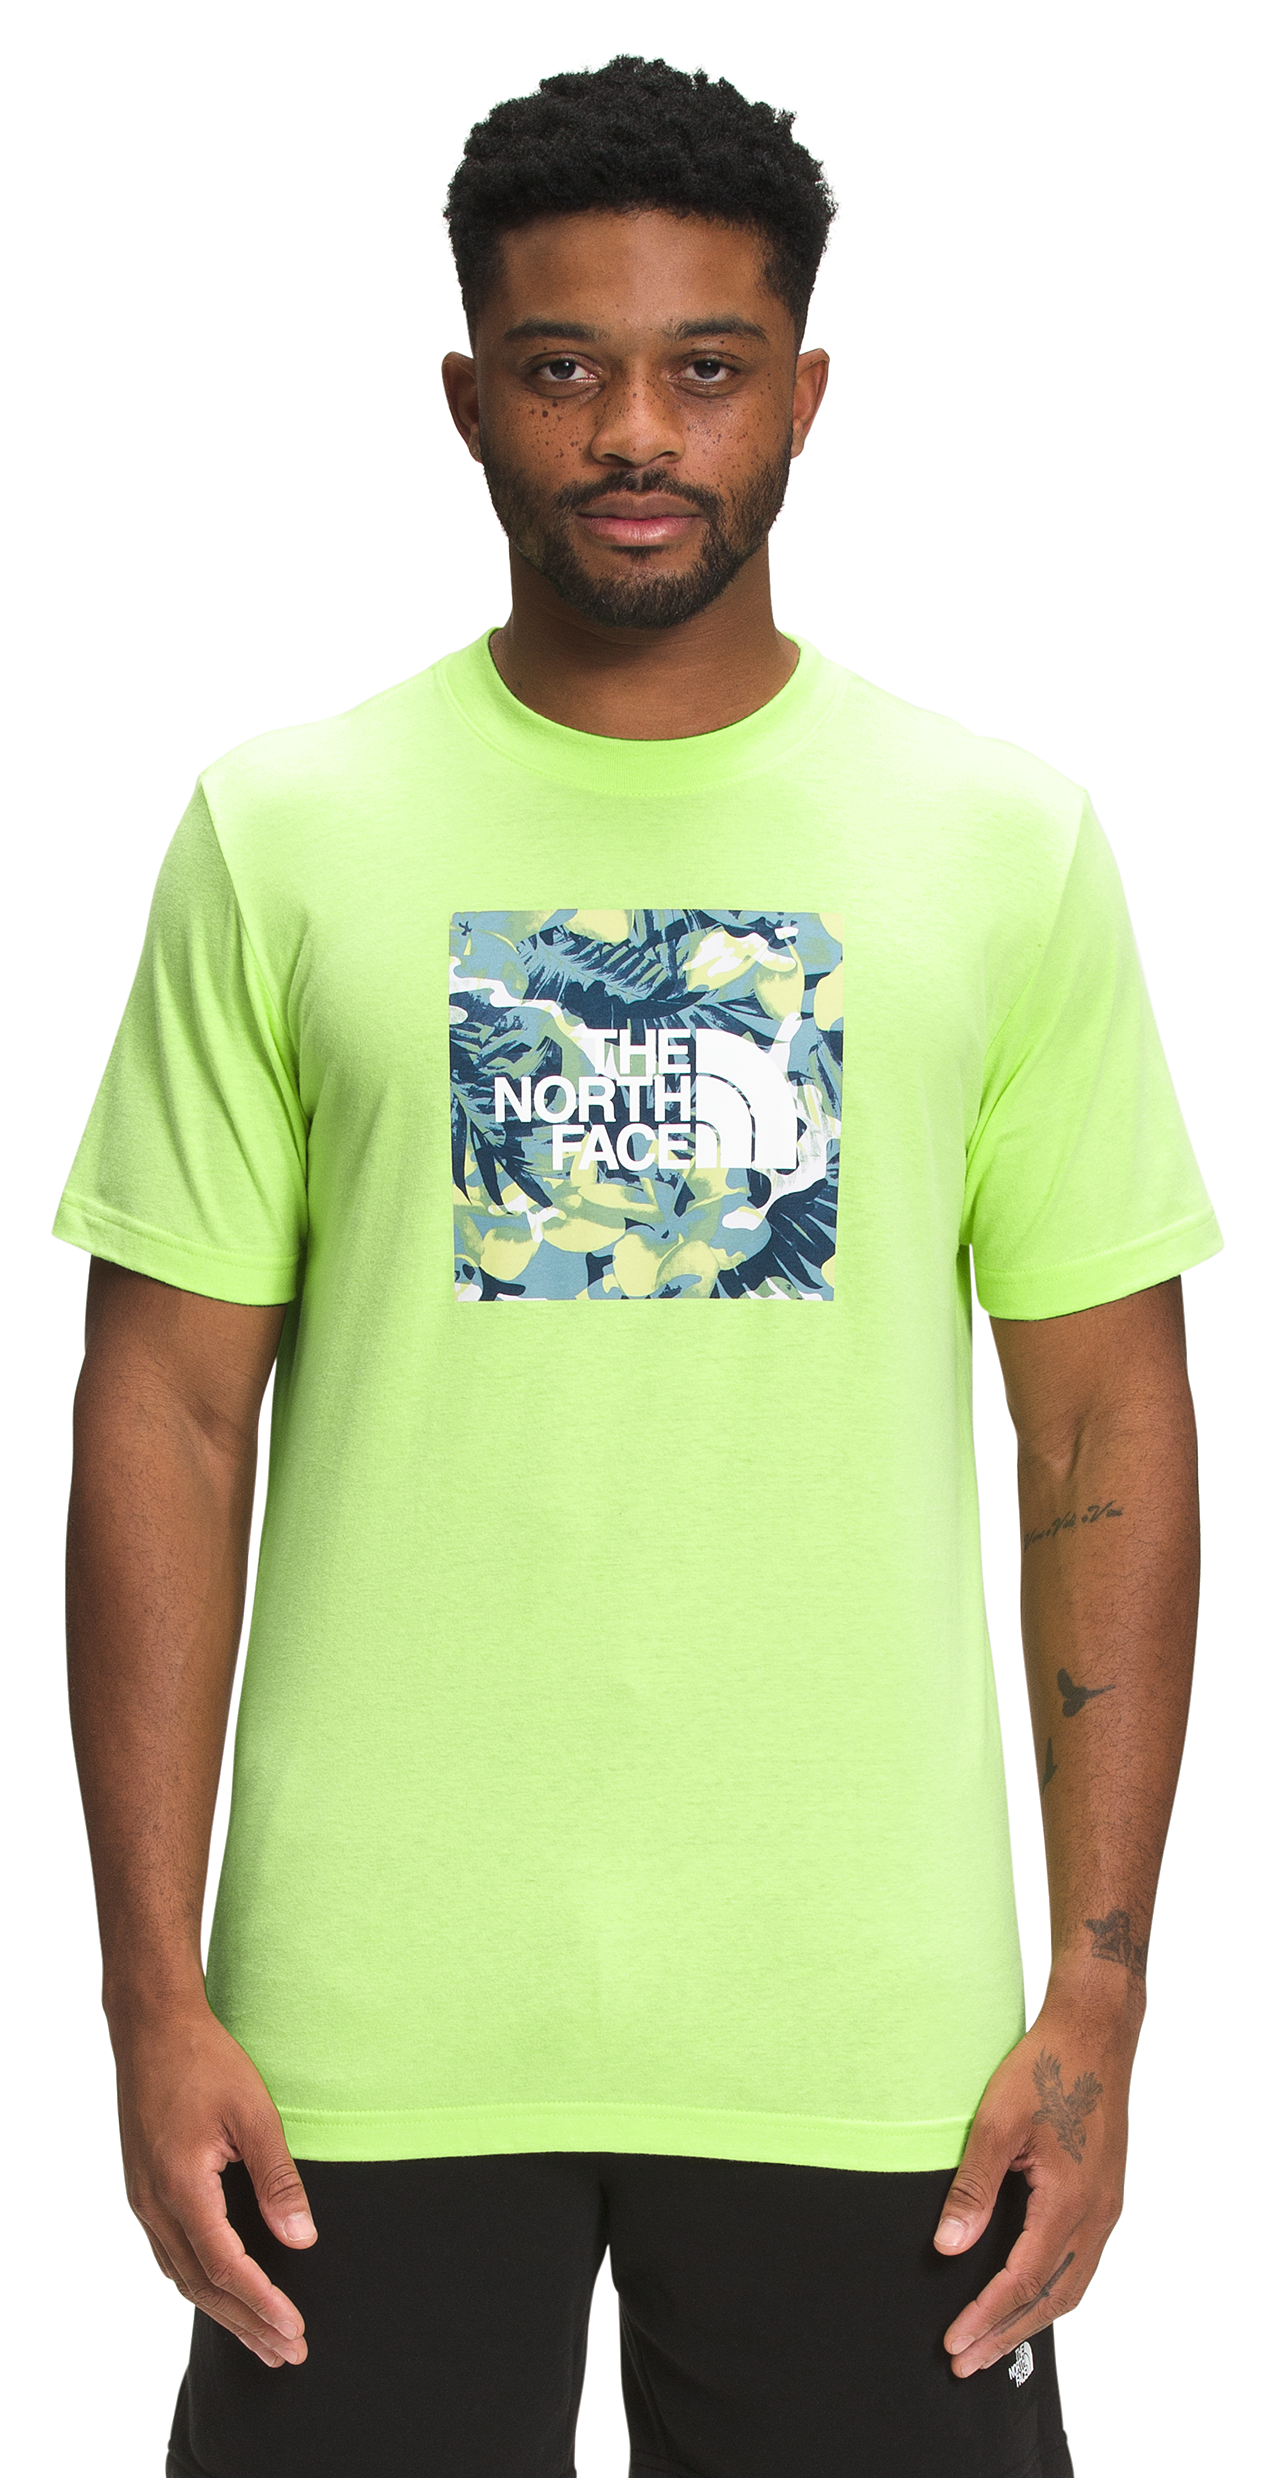 The North Face Boxed Short-Sleeve Shirt for Men - Sharp Green/Tropical Print - M